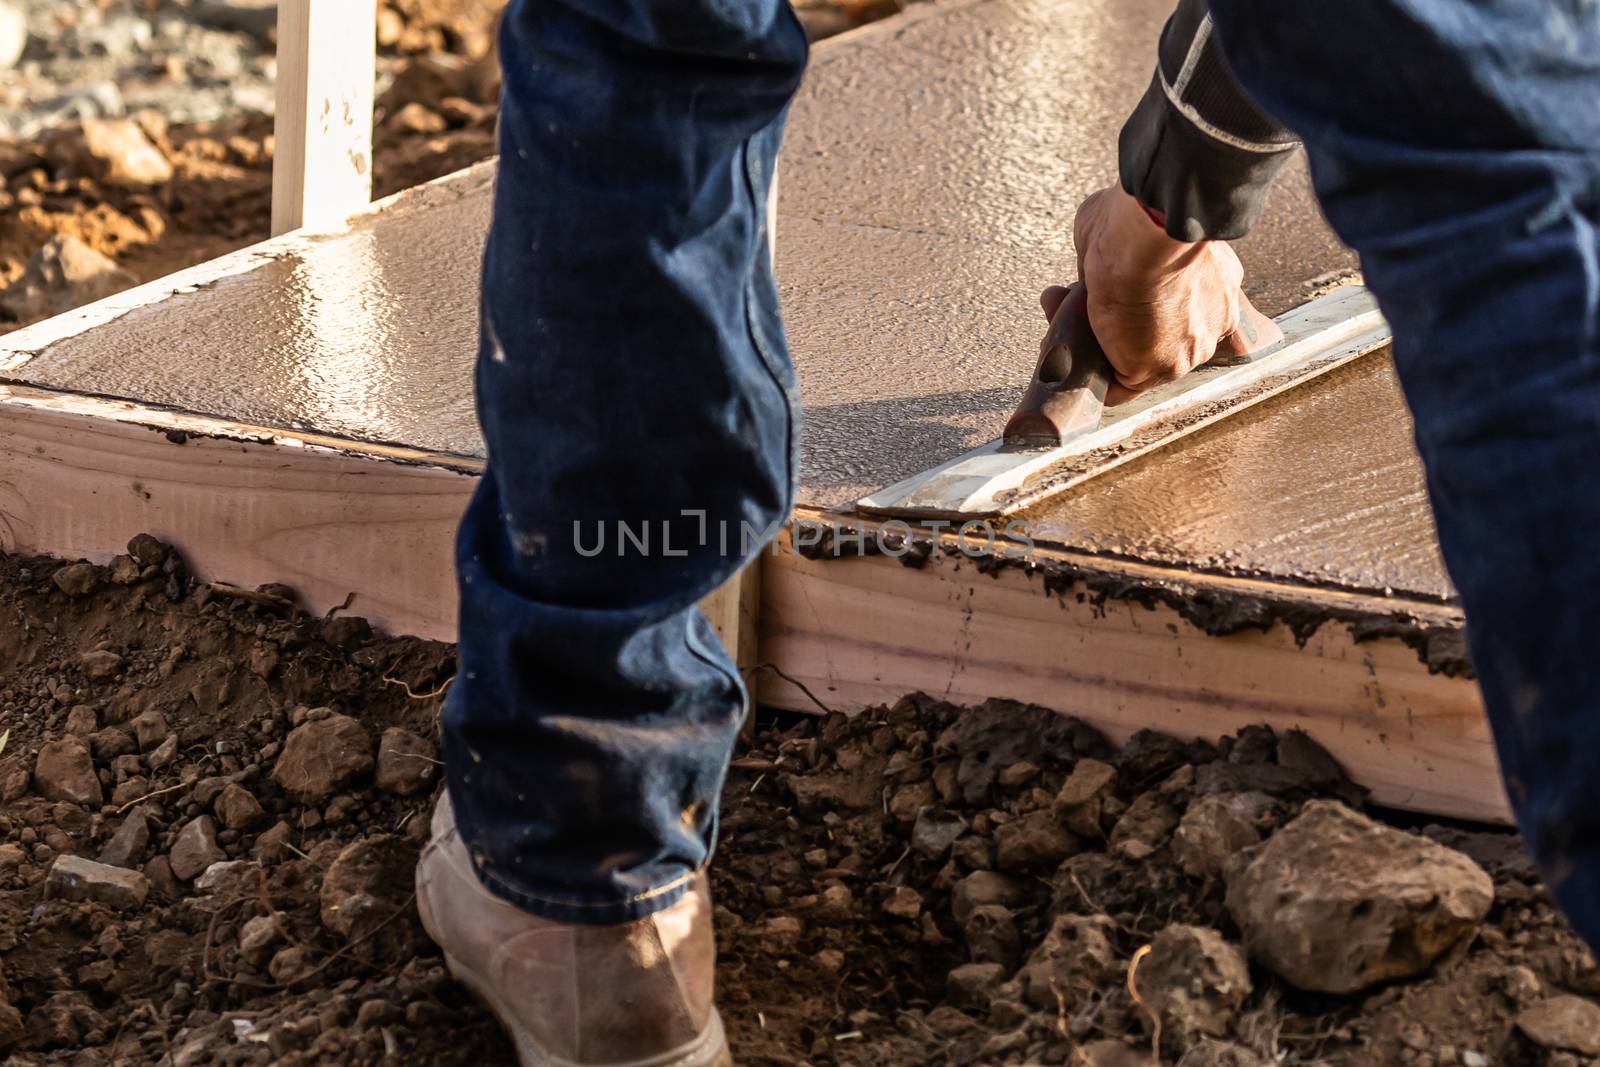 Construction Worker Using Wood Trowel On Wet Cement Forming Copi by Feverpitched